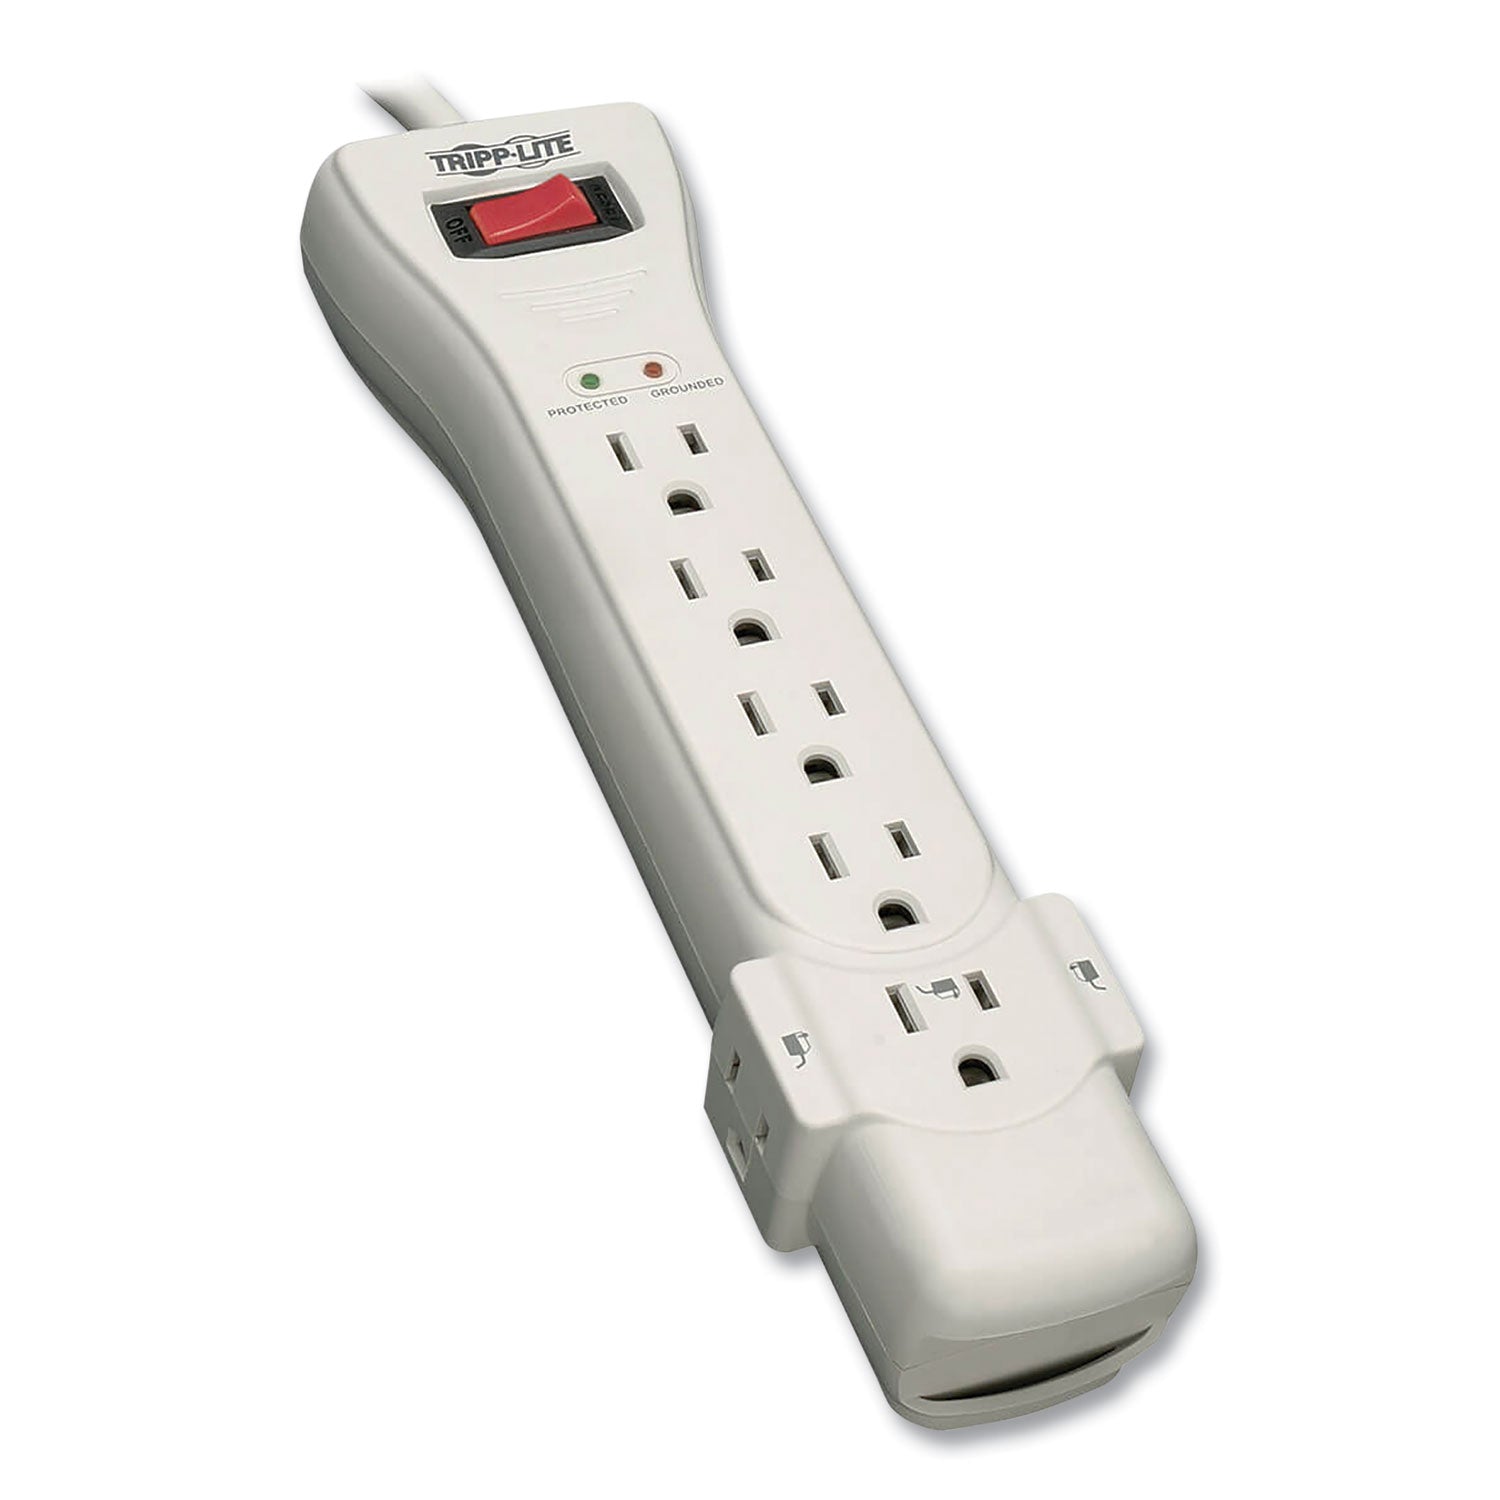 Protect It! Surge Protector, 7 AC Outlets, 7 ft Cord, 2,160 J, Light Gray - 